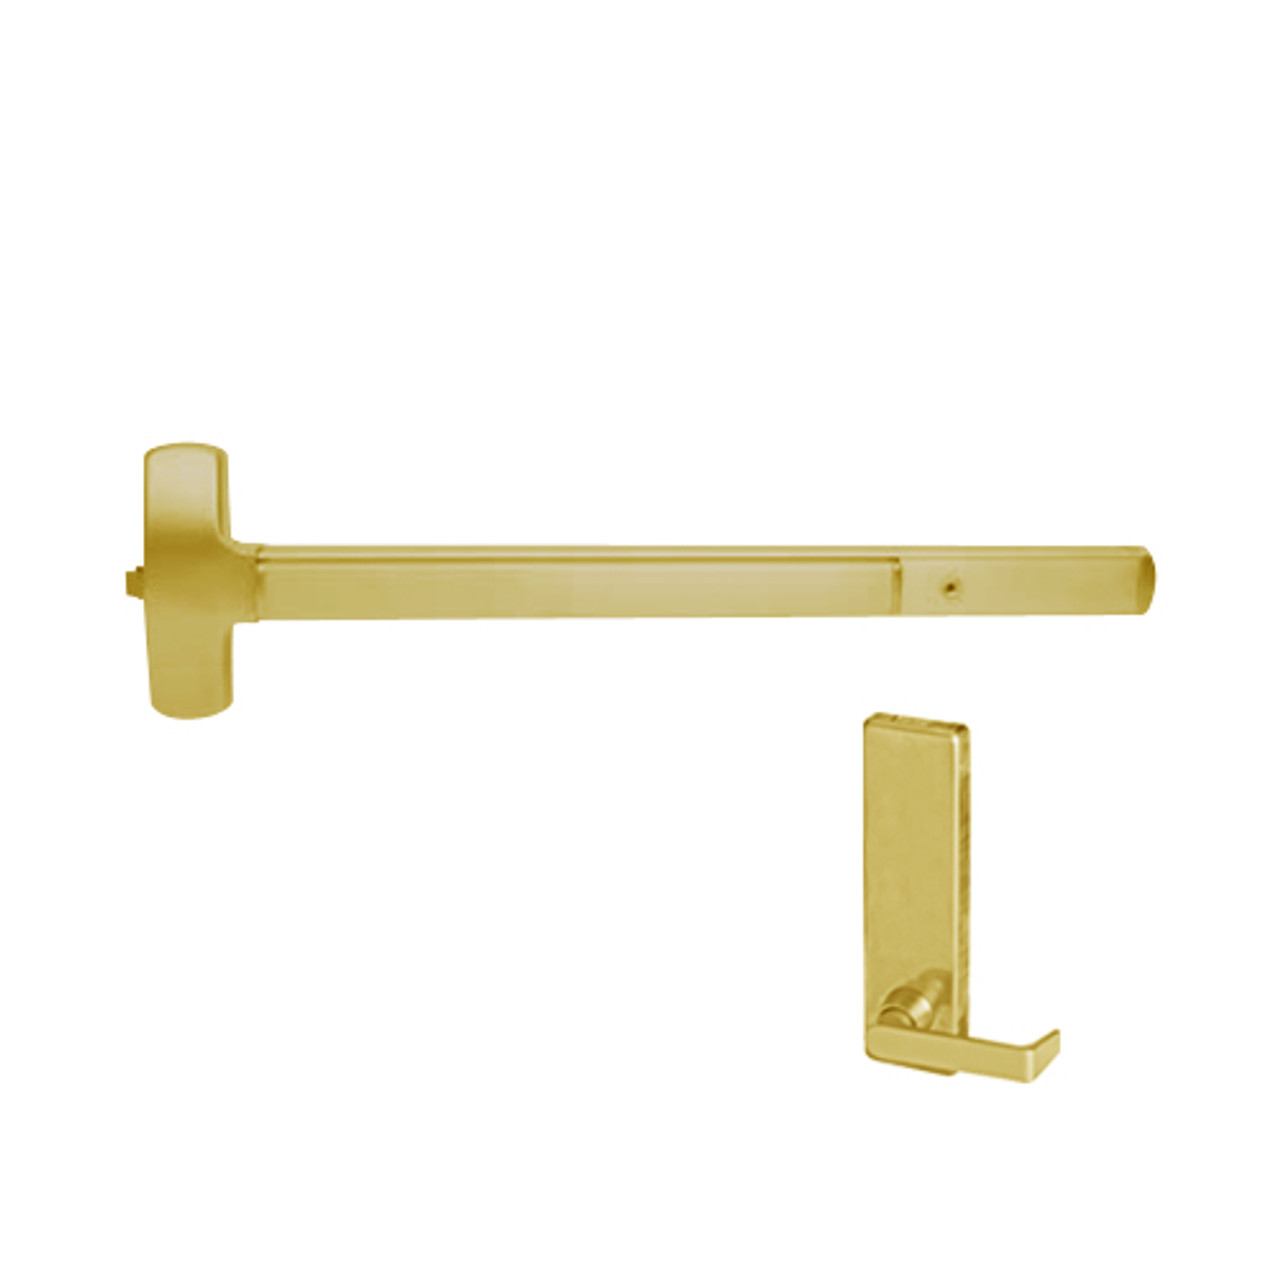 25-R-L-BE-DANE-US3-3-RHR Falcon Exit Device in Polished Brass